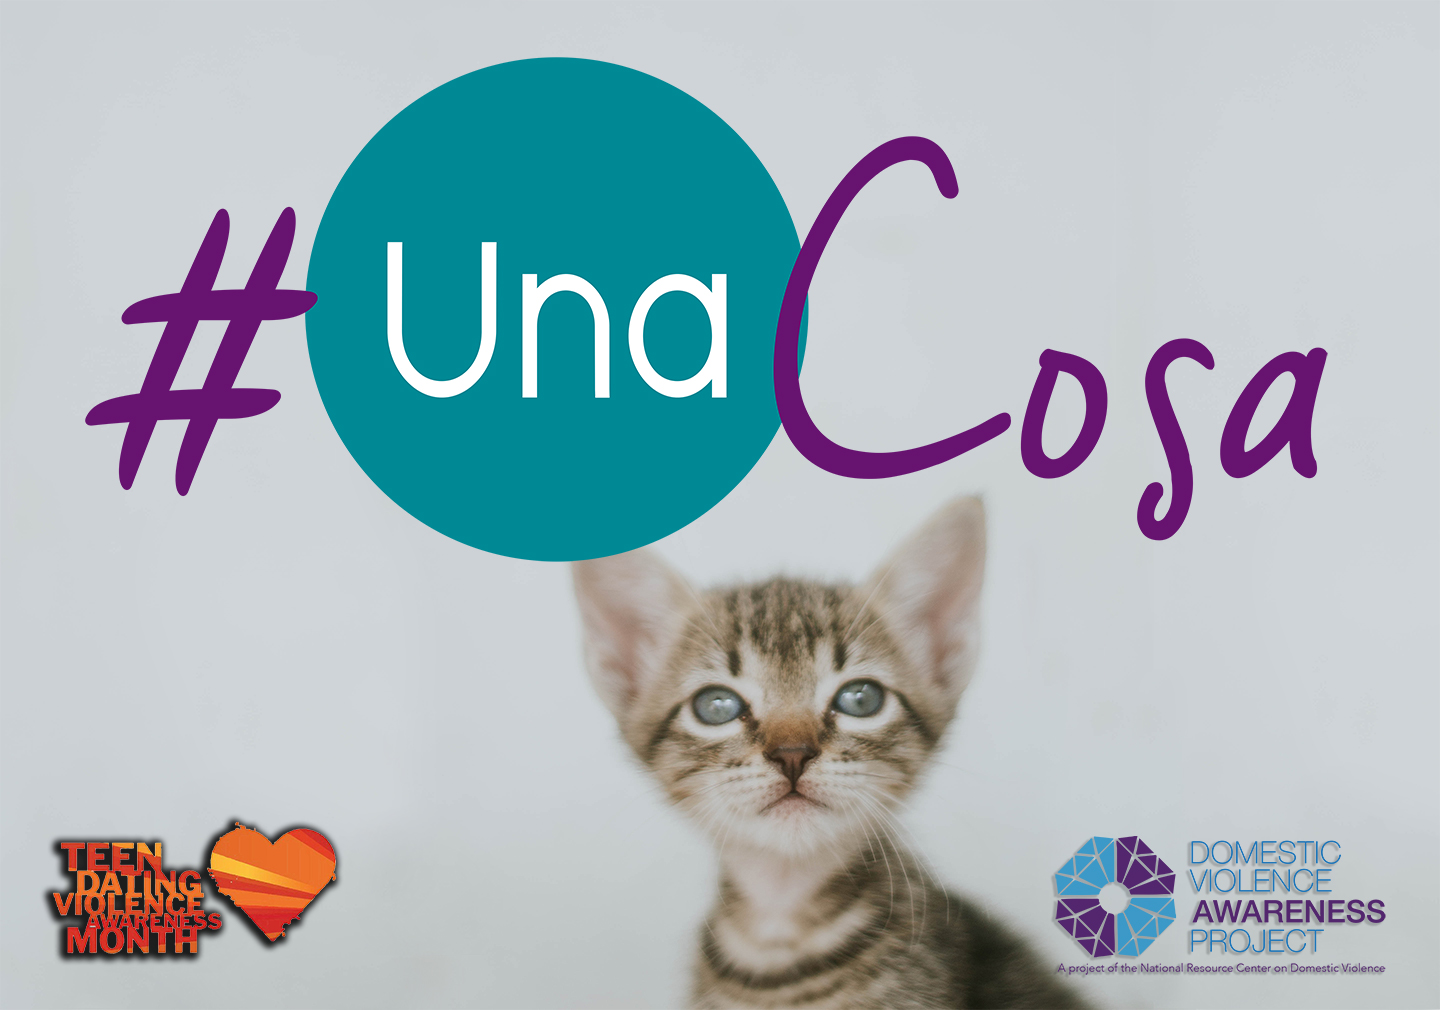 #UnaCosa logo imposed over image of a kitten